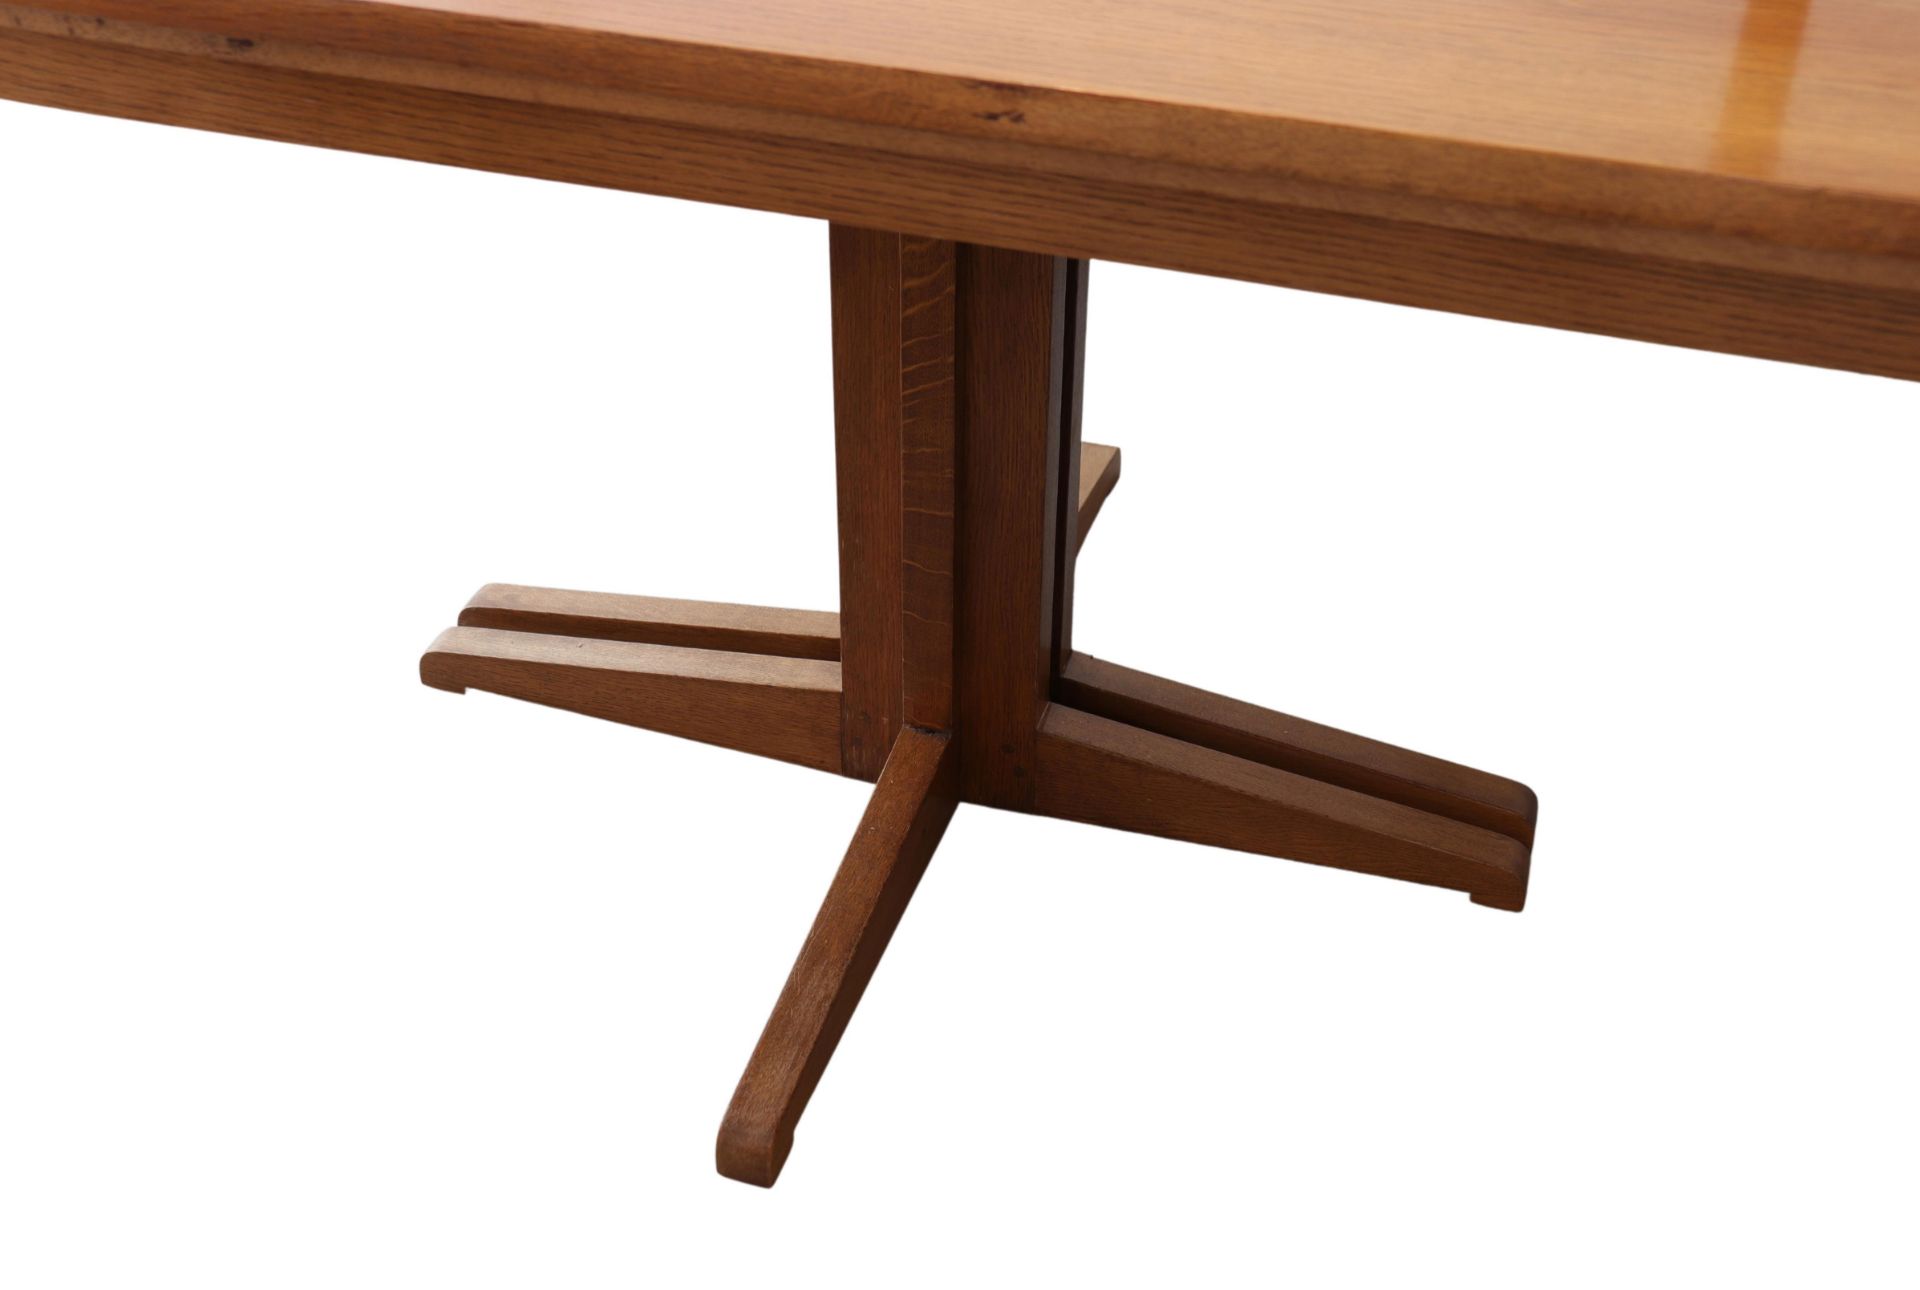 Large design table and chairs (6) in light wood. - Image 3 of 4